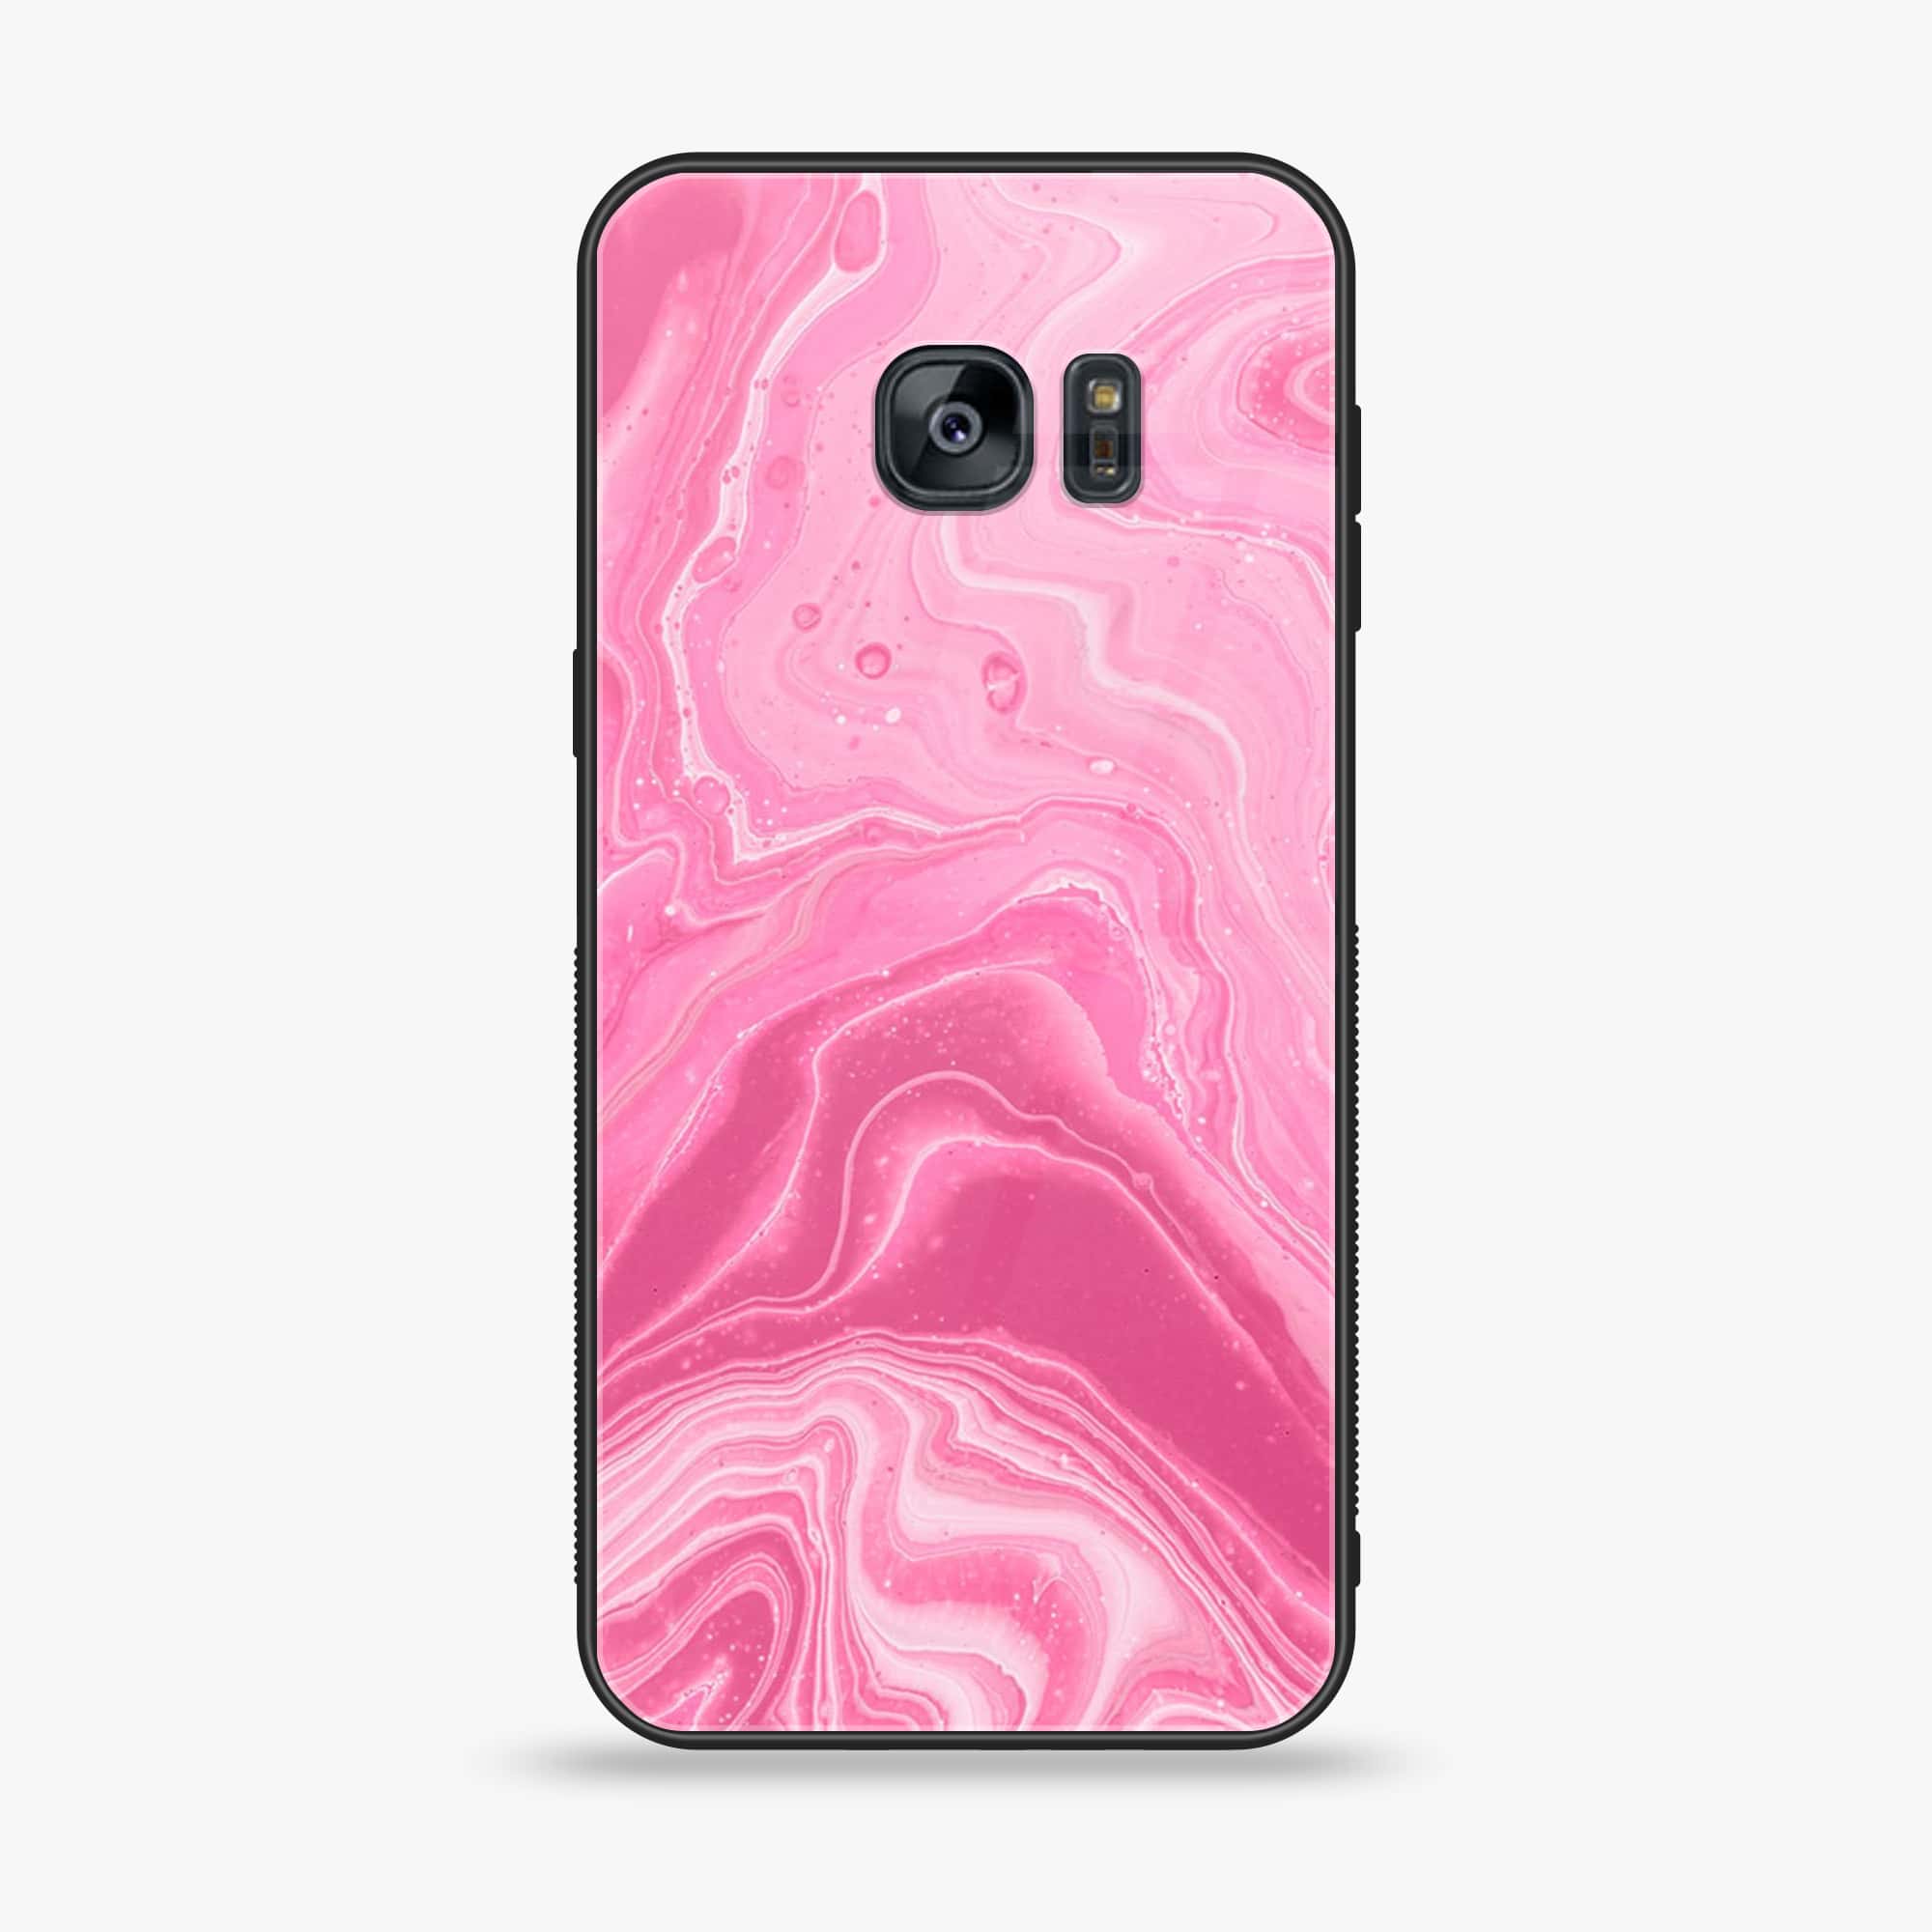 Samsung Galaxy S7 - Pink Marble Series - Premium Printed Glass soft Bumper shock Proof Case